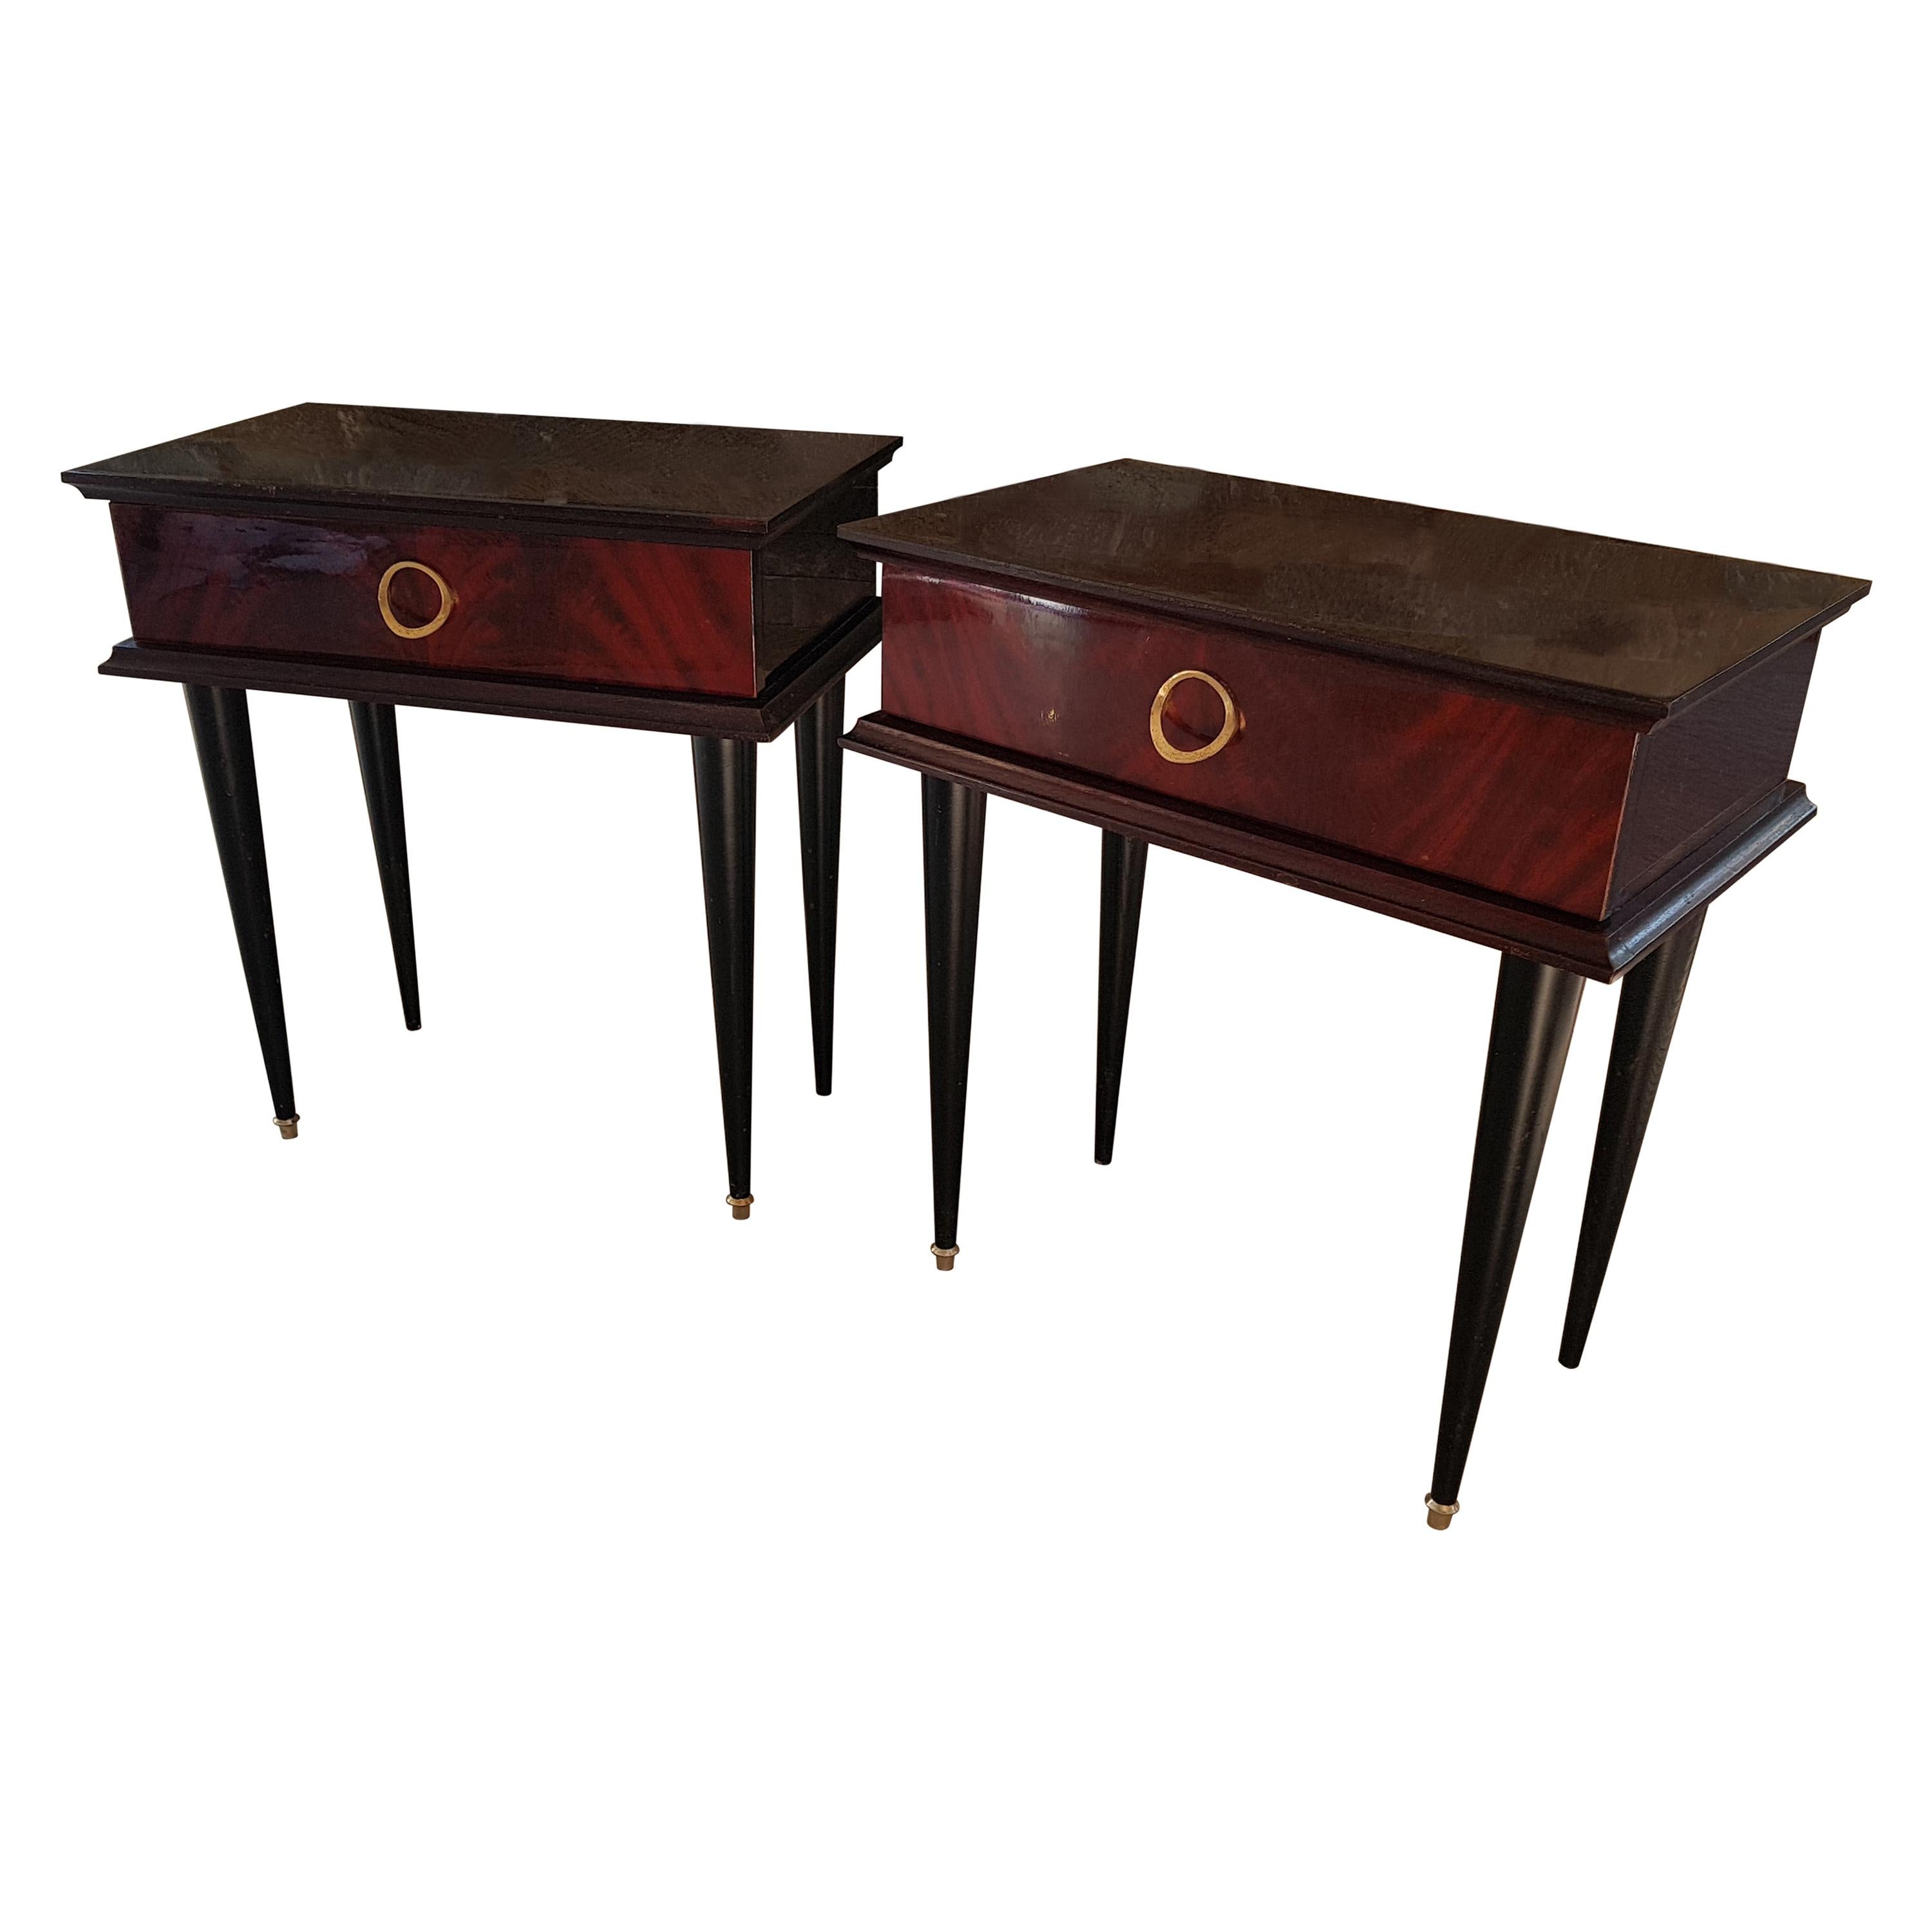 Art Deco Midcentury Mahogany Bedside Tables Nightstands, France, 1950 For Sale